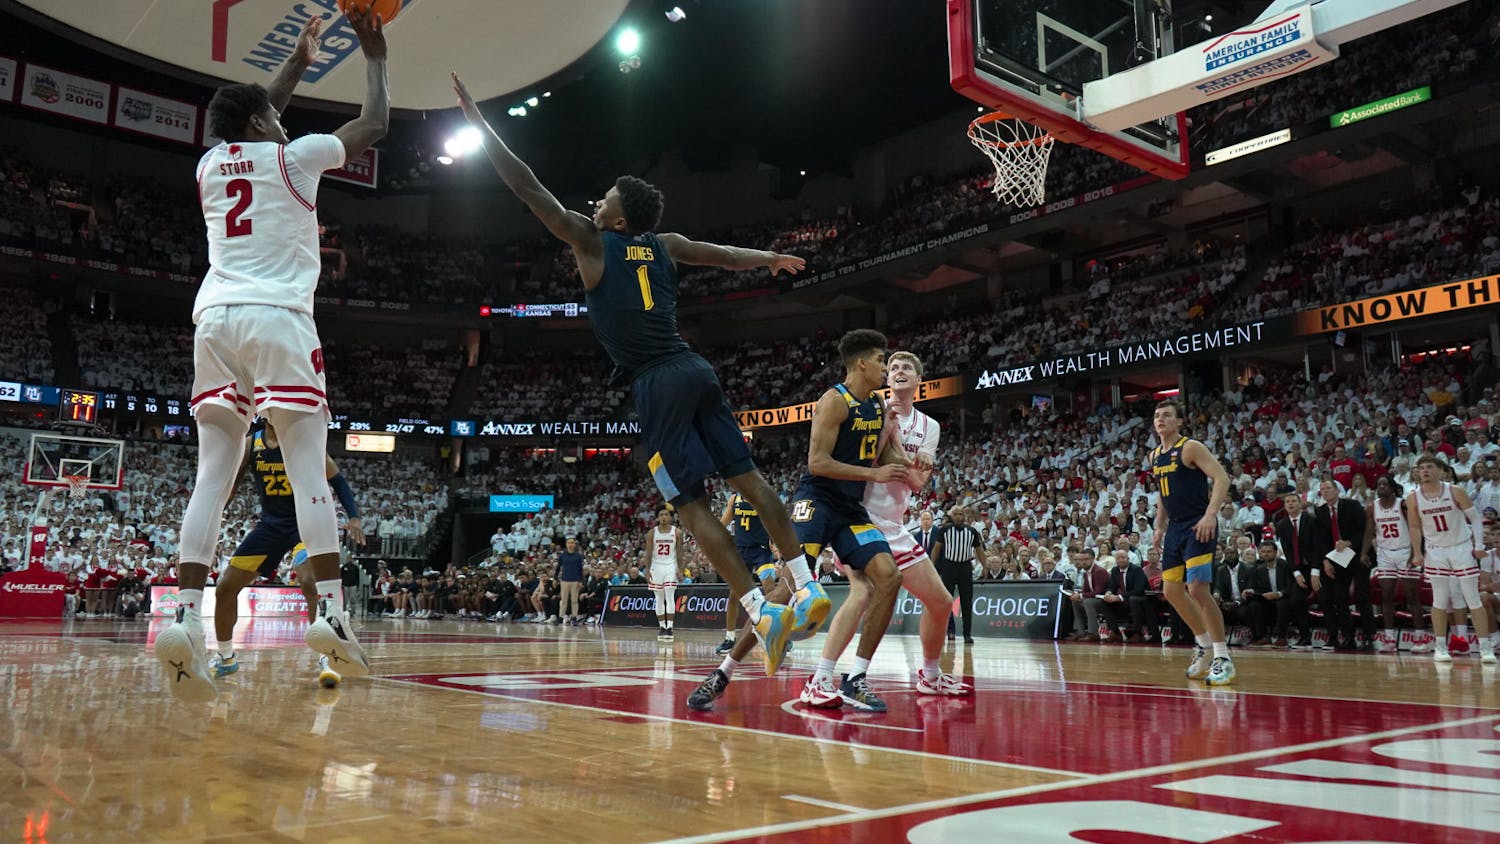 PHOTOS: Wisconsin Mens Basketball upset No. 3 Marquette in 75-64 victory